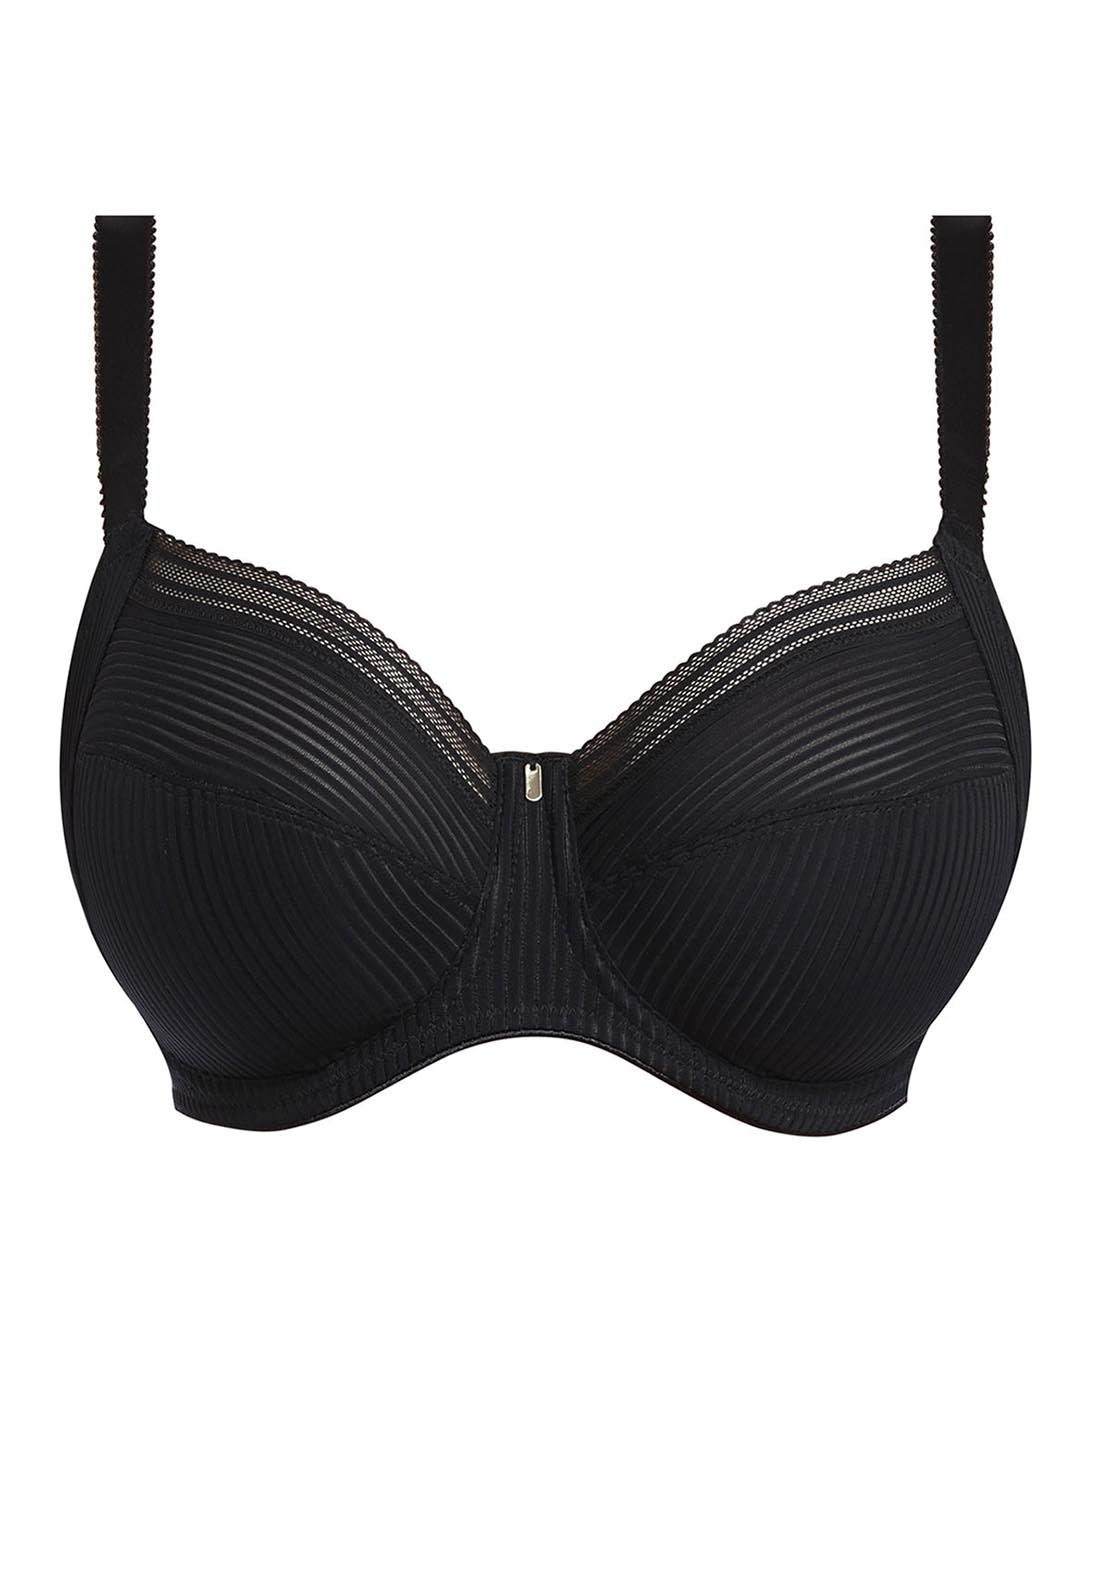 Fantasie Fusion Full Cup Side Support Bra - Black 1 Shaws Department Stores